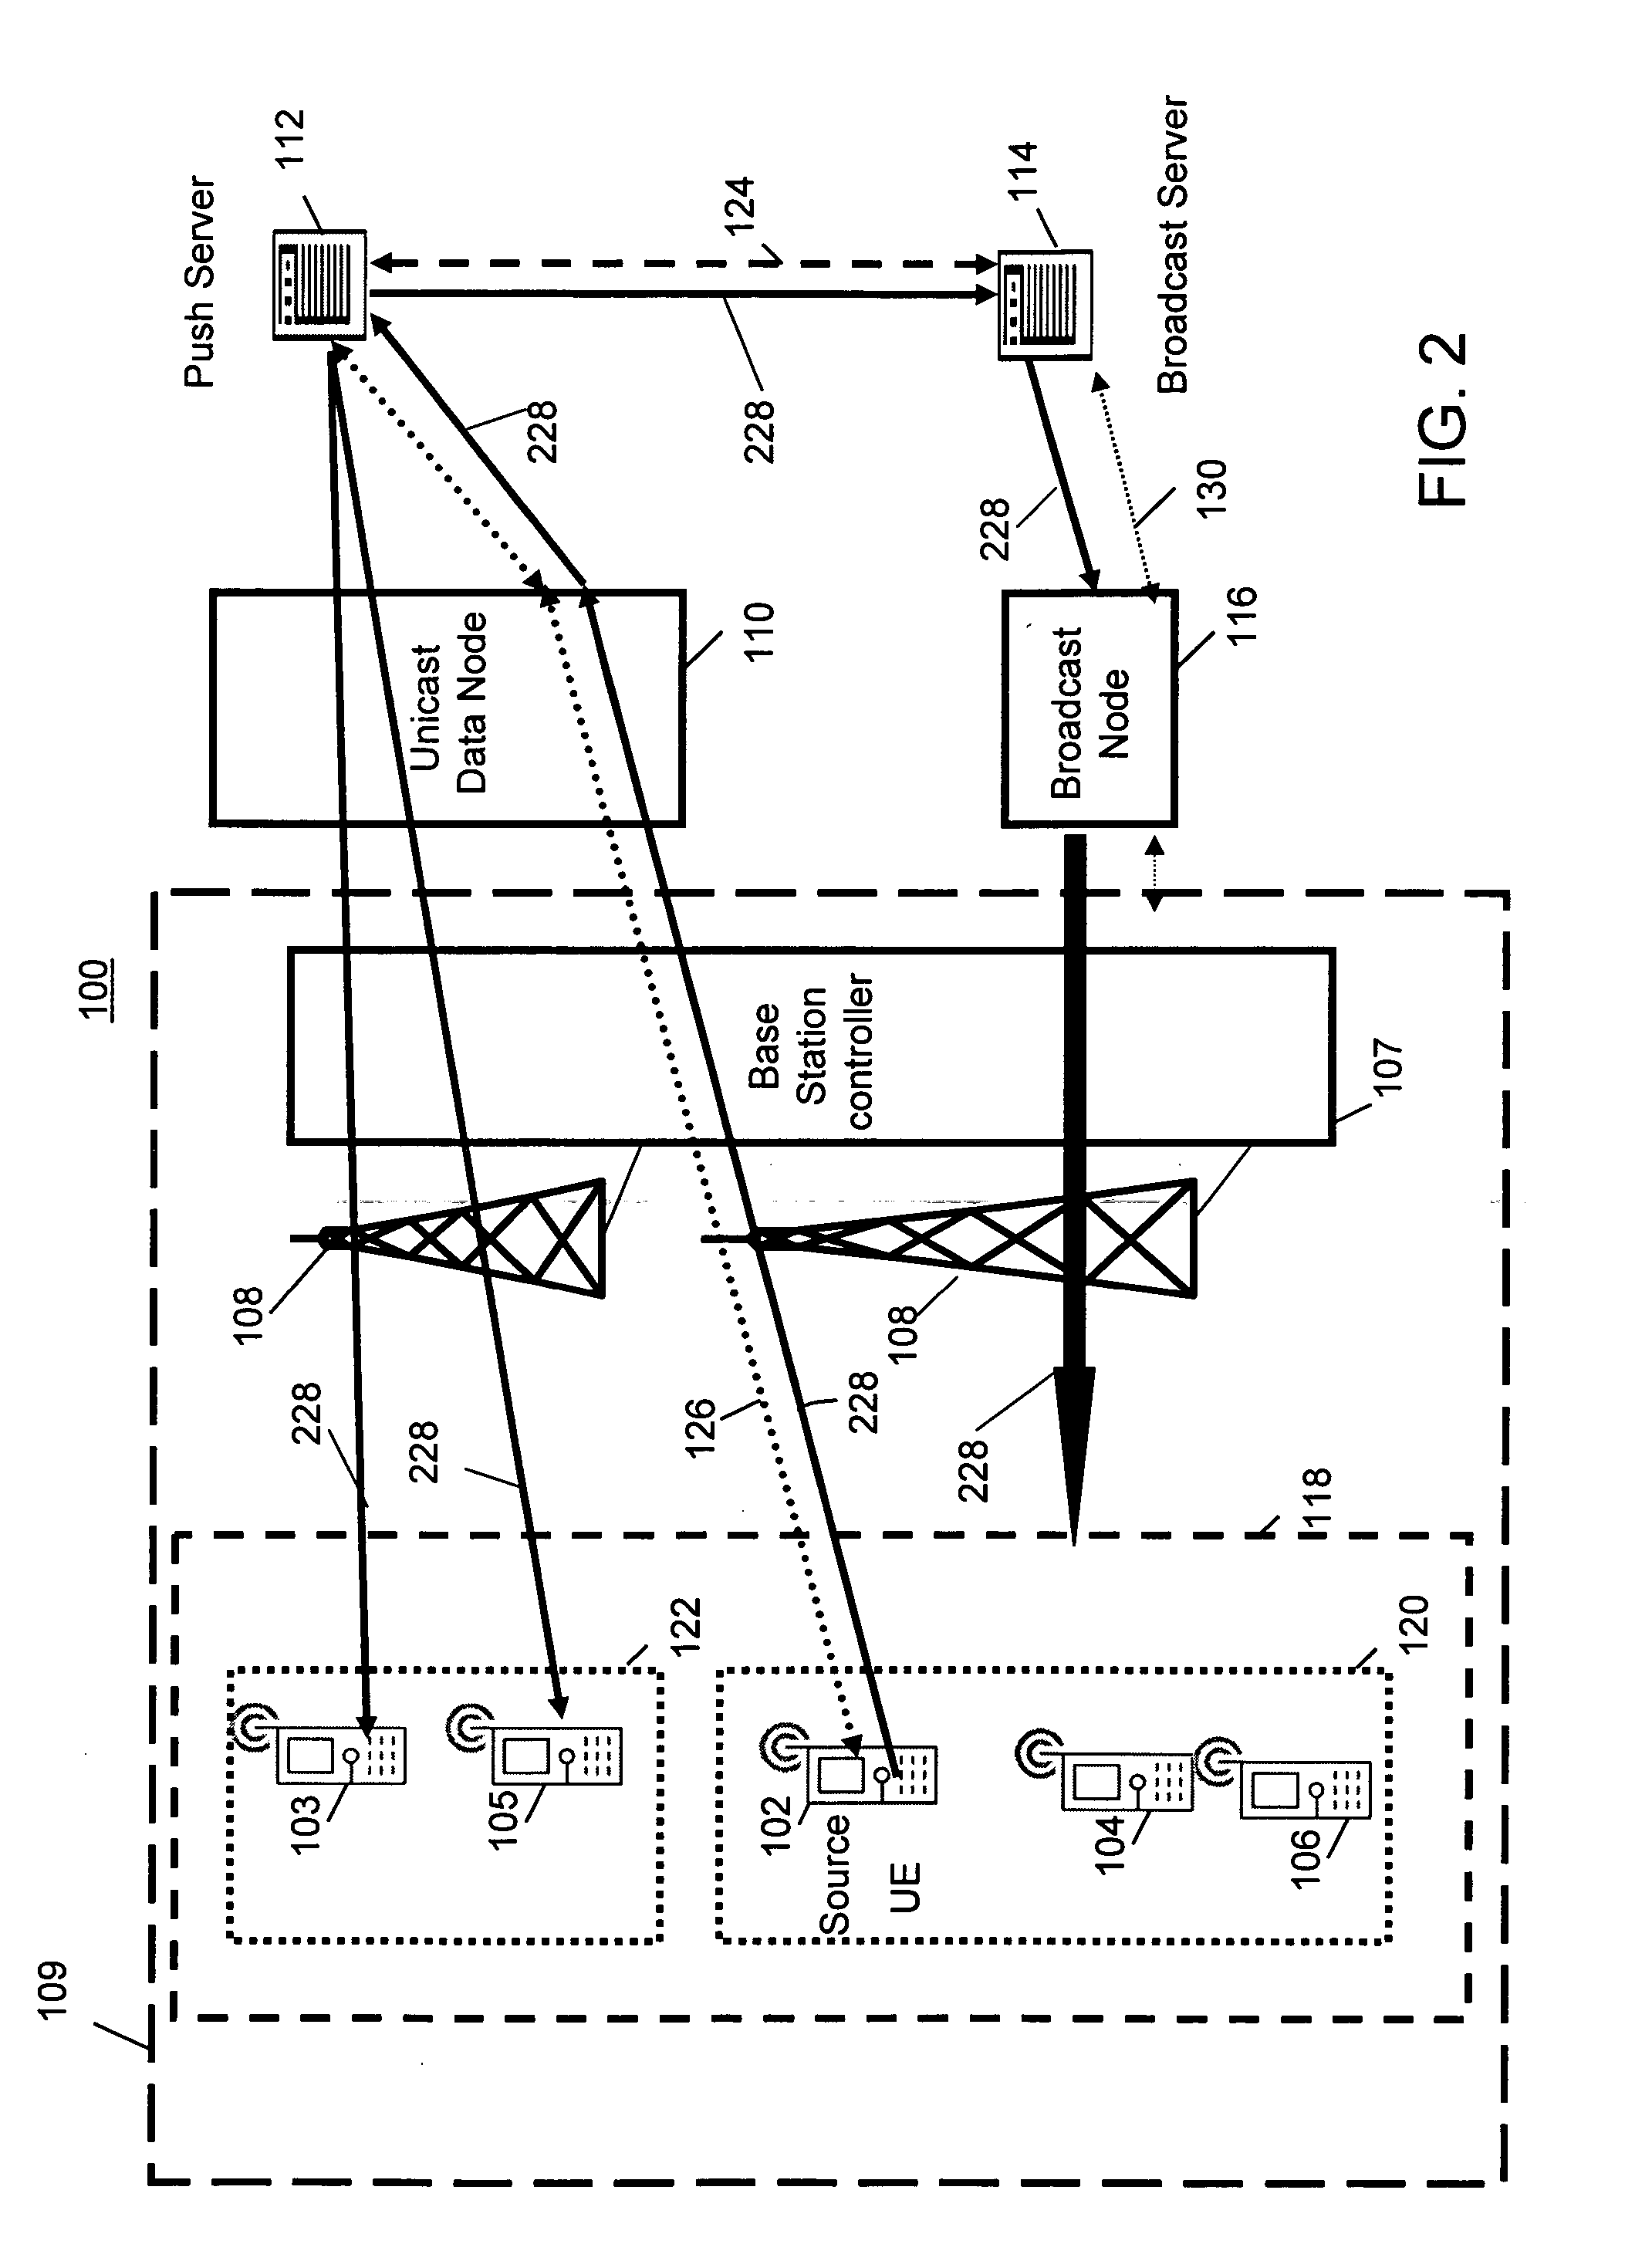 Method and system for multicasting data in a communication network